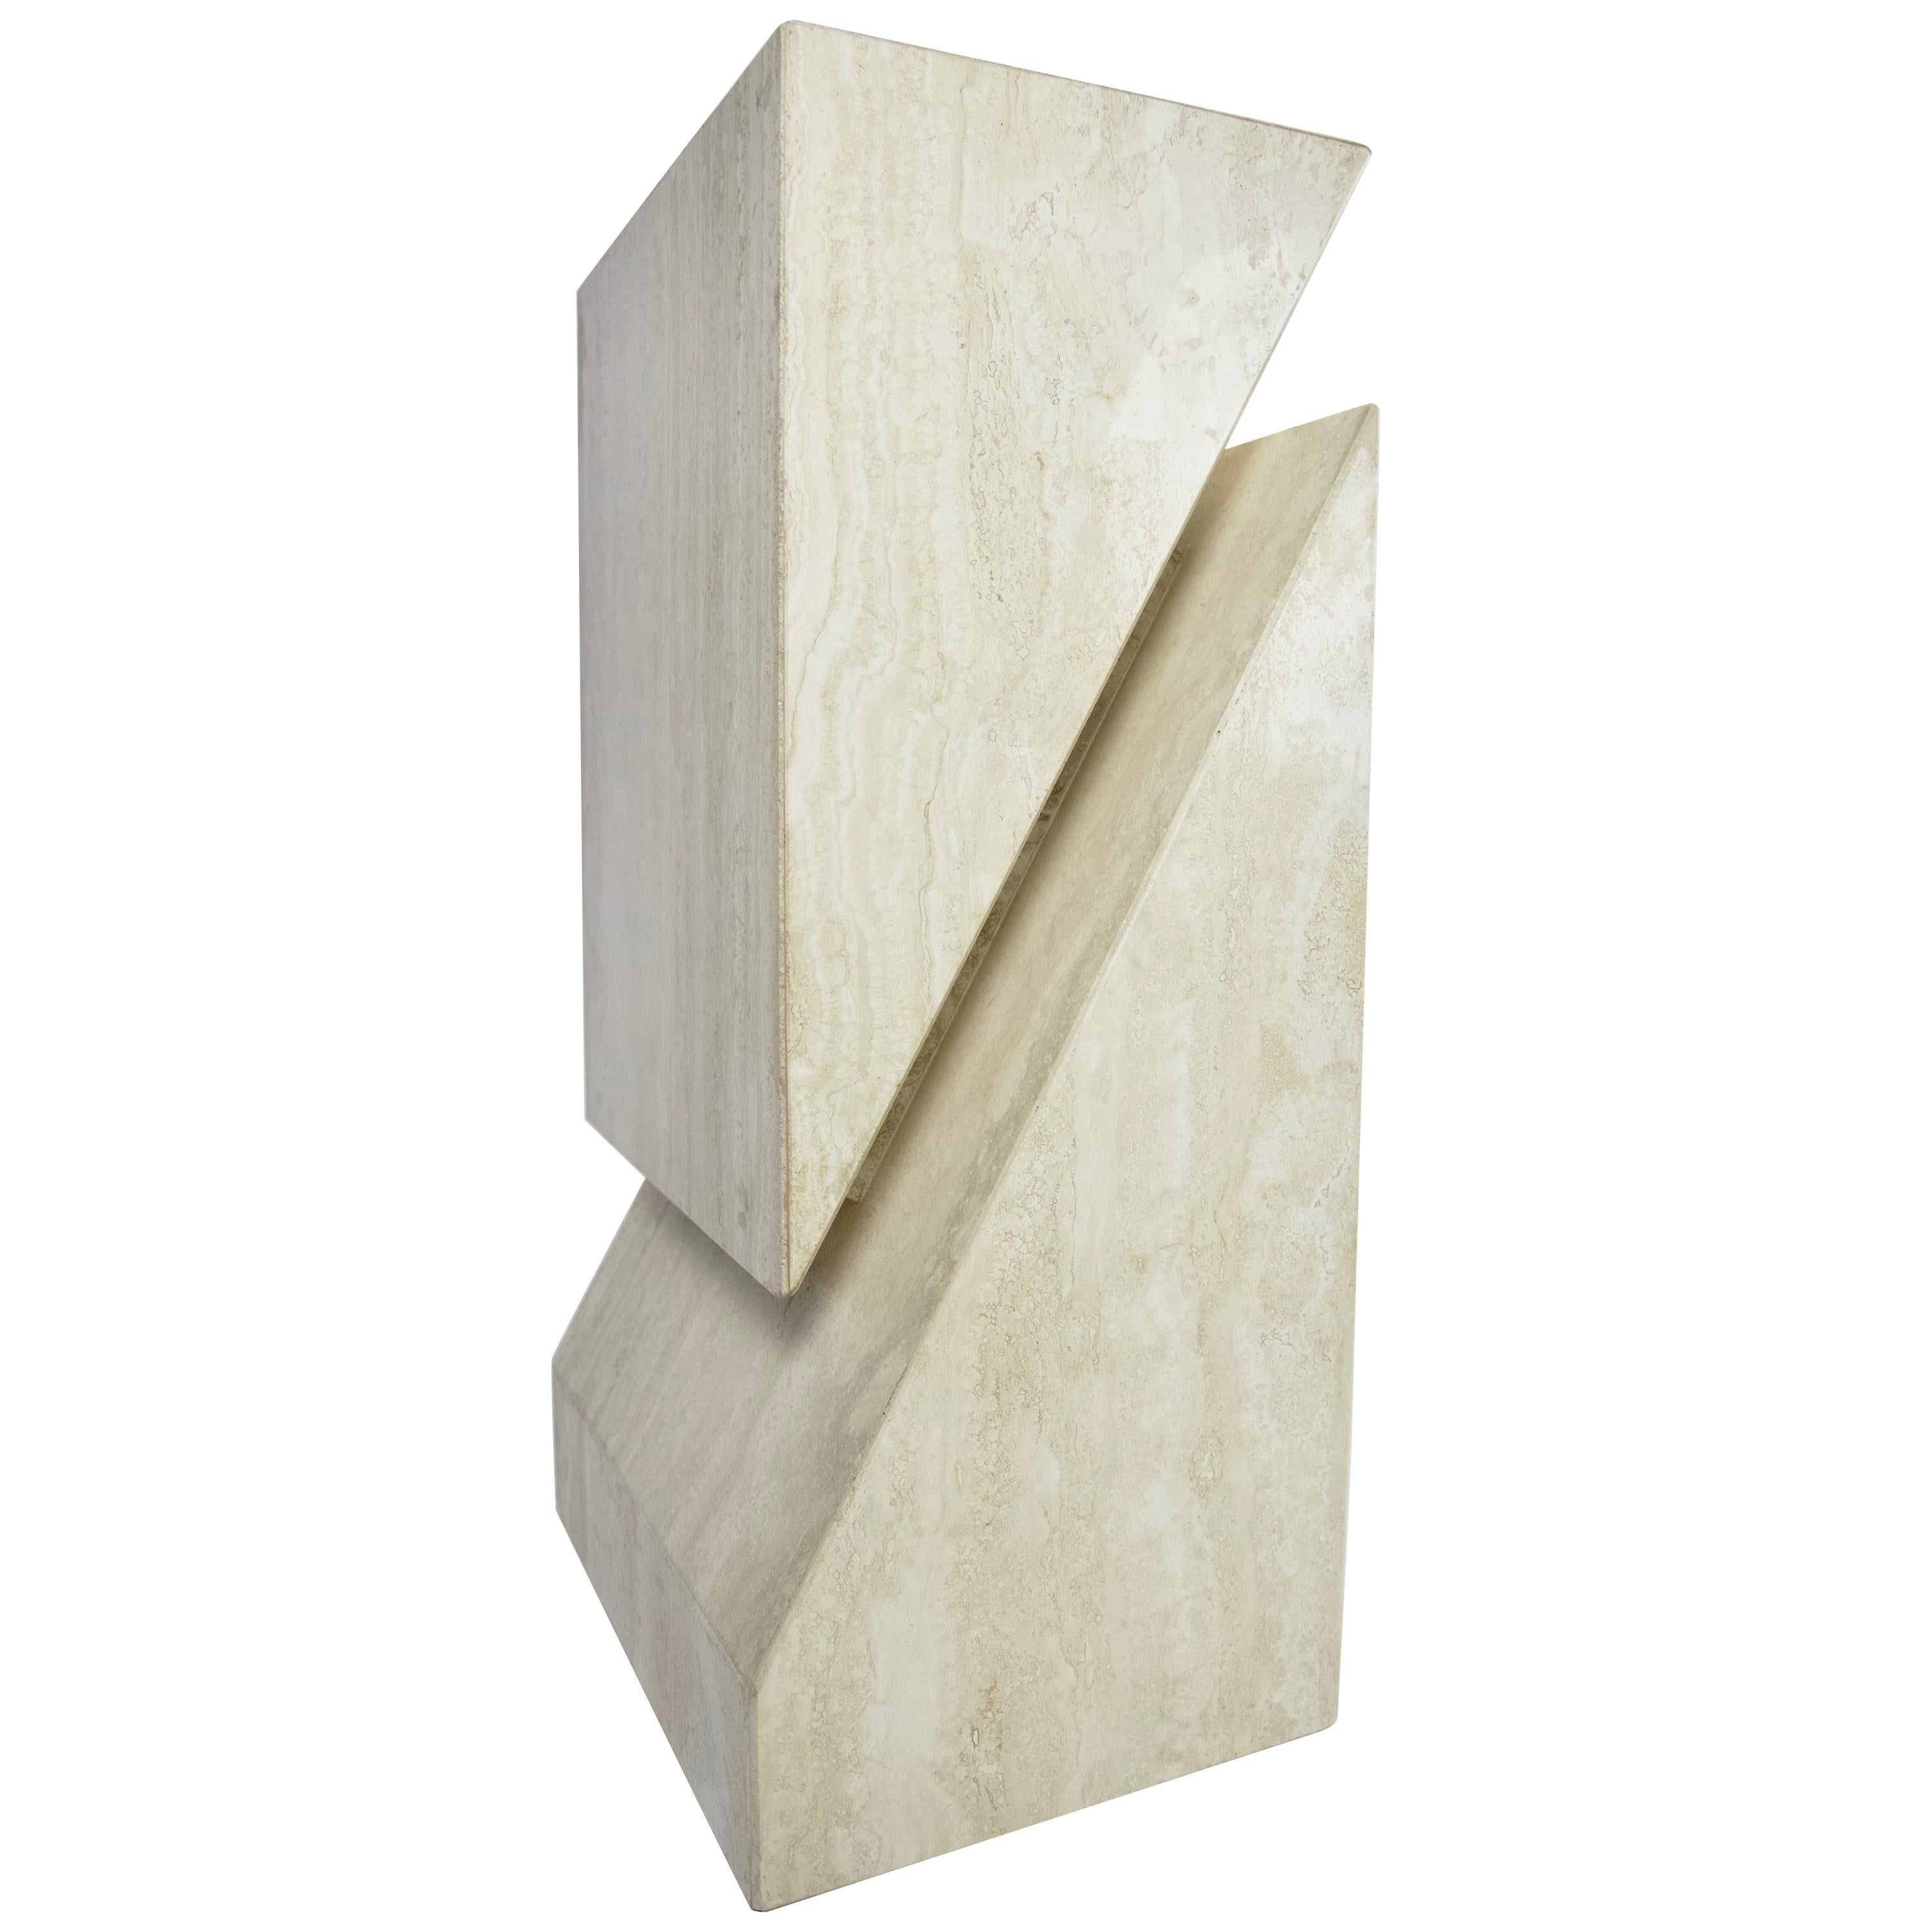 Abstract Travertine Table Base or Pedestal Attributed to Up&Up